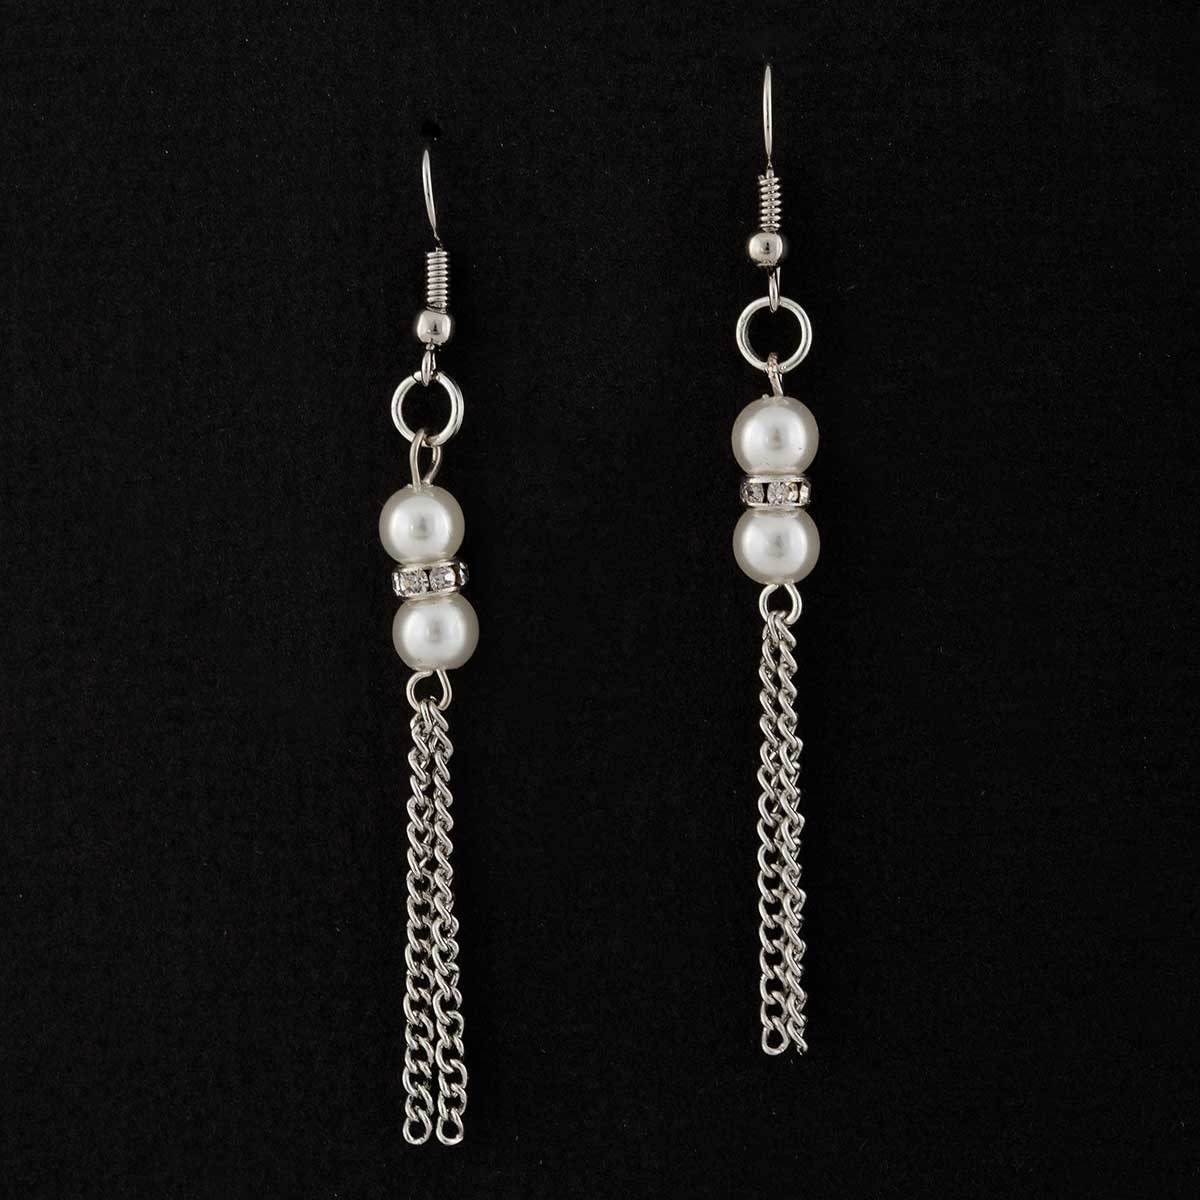 Silver Chain with Pearls French Wire Dangle Earrings .25"x2.25"